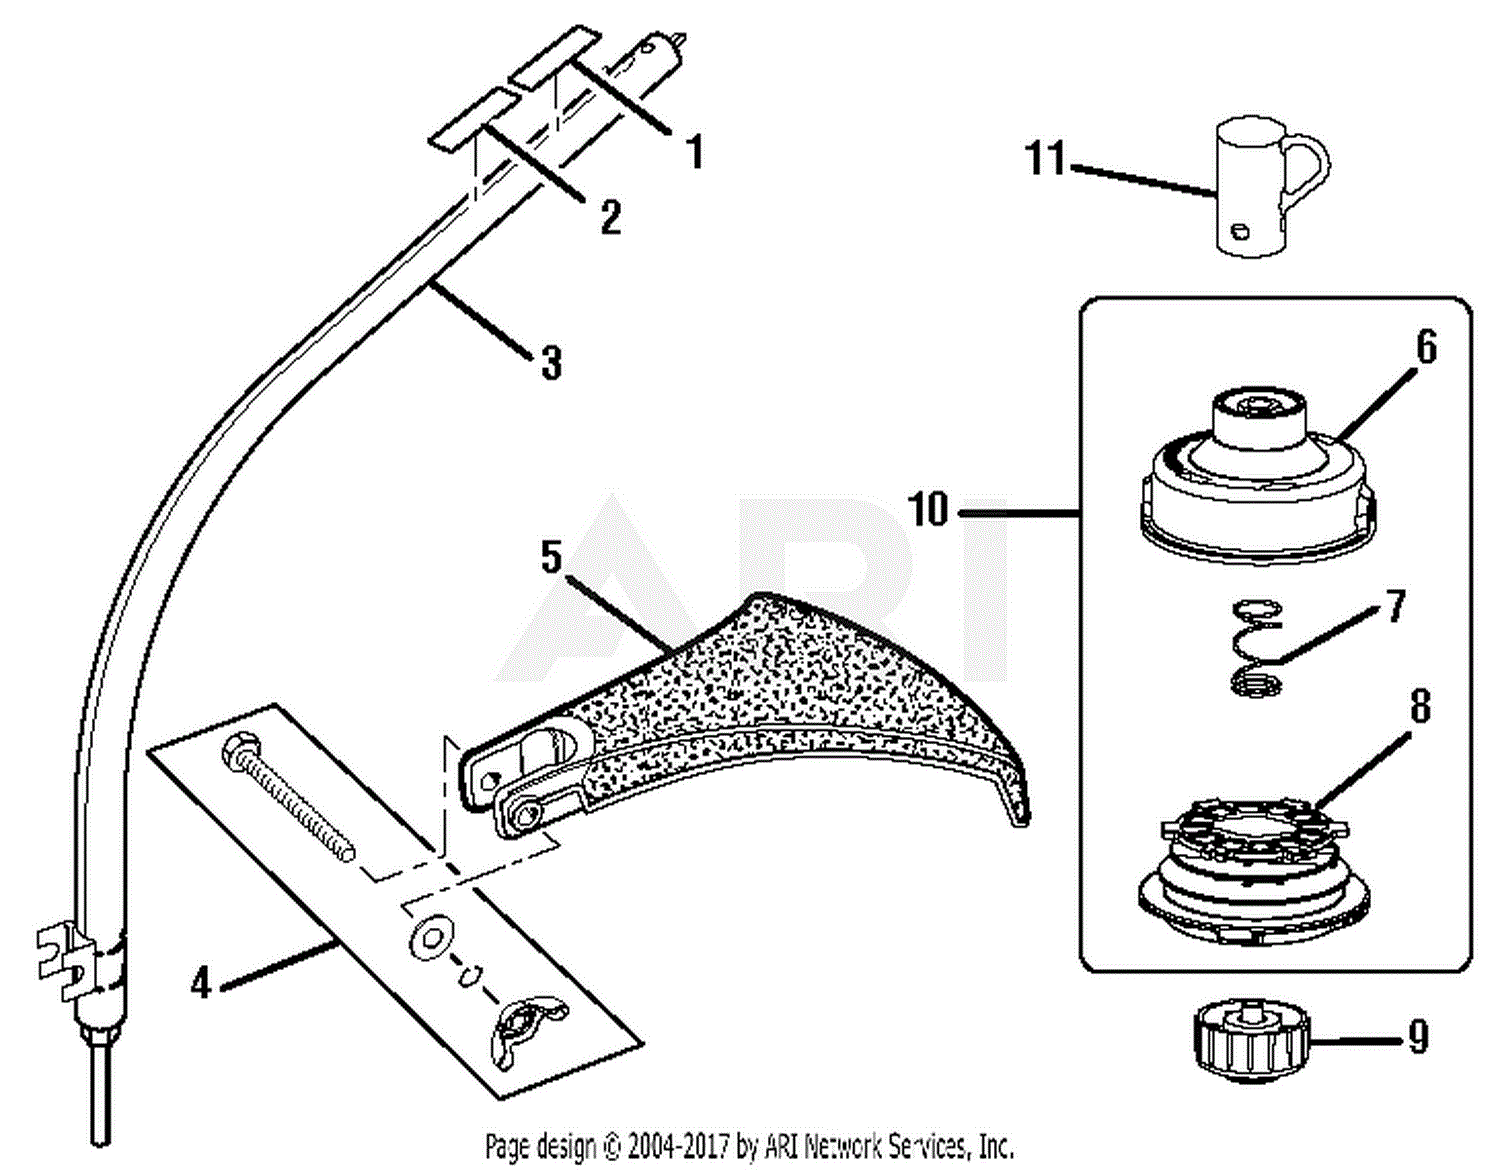 Homelite RY28121 26cc String Trimmers Parts Diagram for Figure C